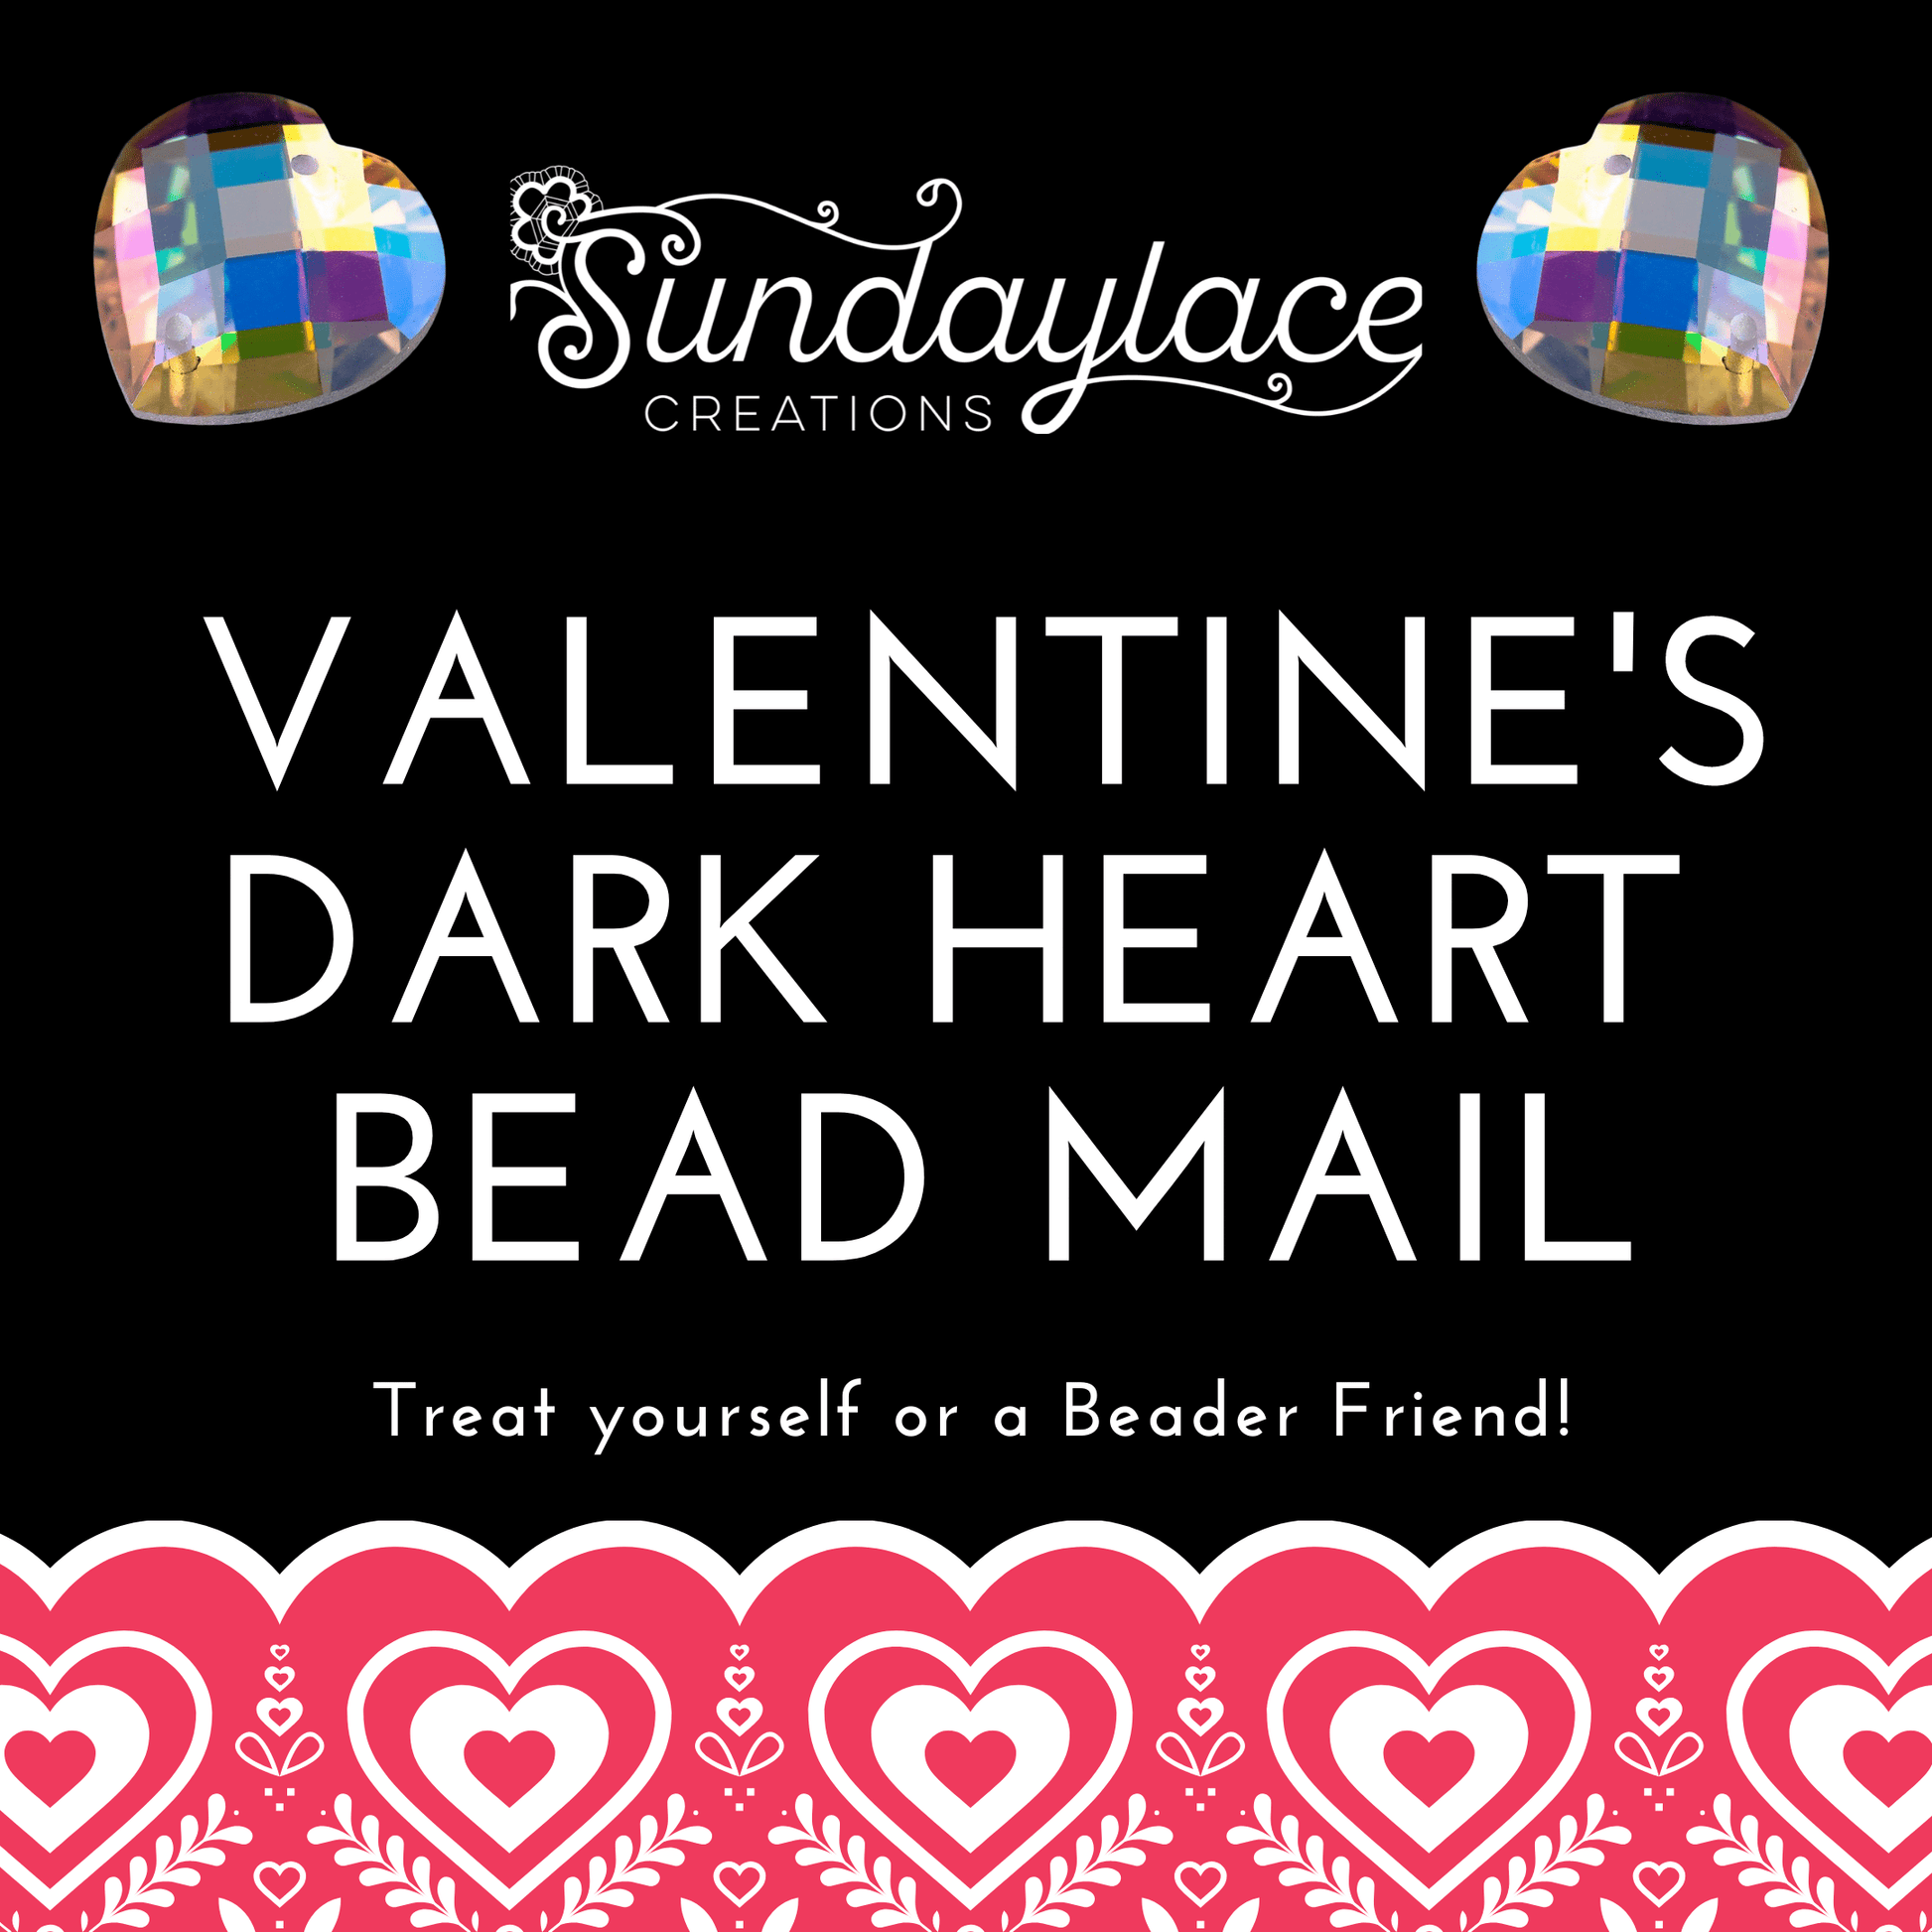 Promotional Products Promotions Dark Heart Valentines Bead Mail LAST CHANCE: Valentine's Supplies Surprise Bag!